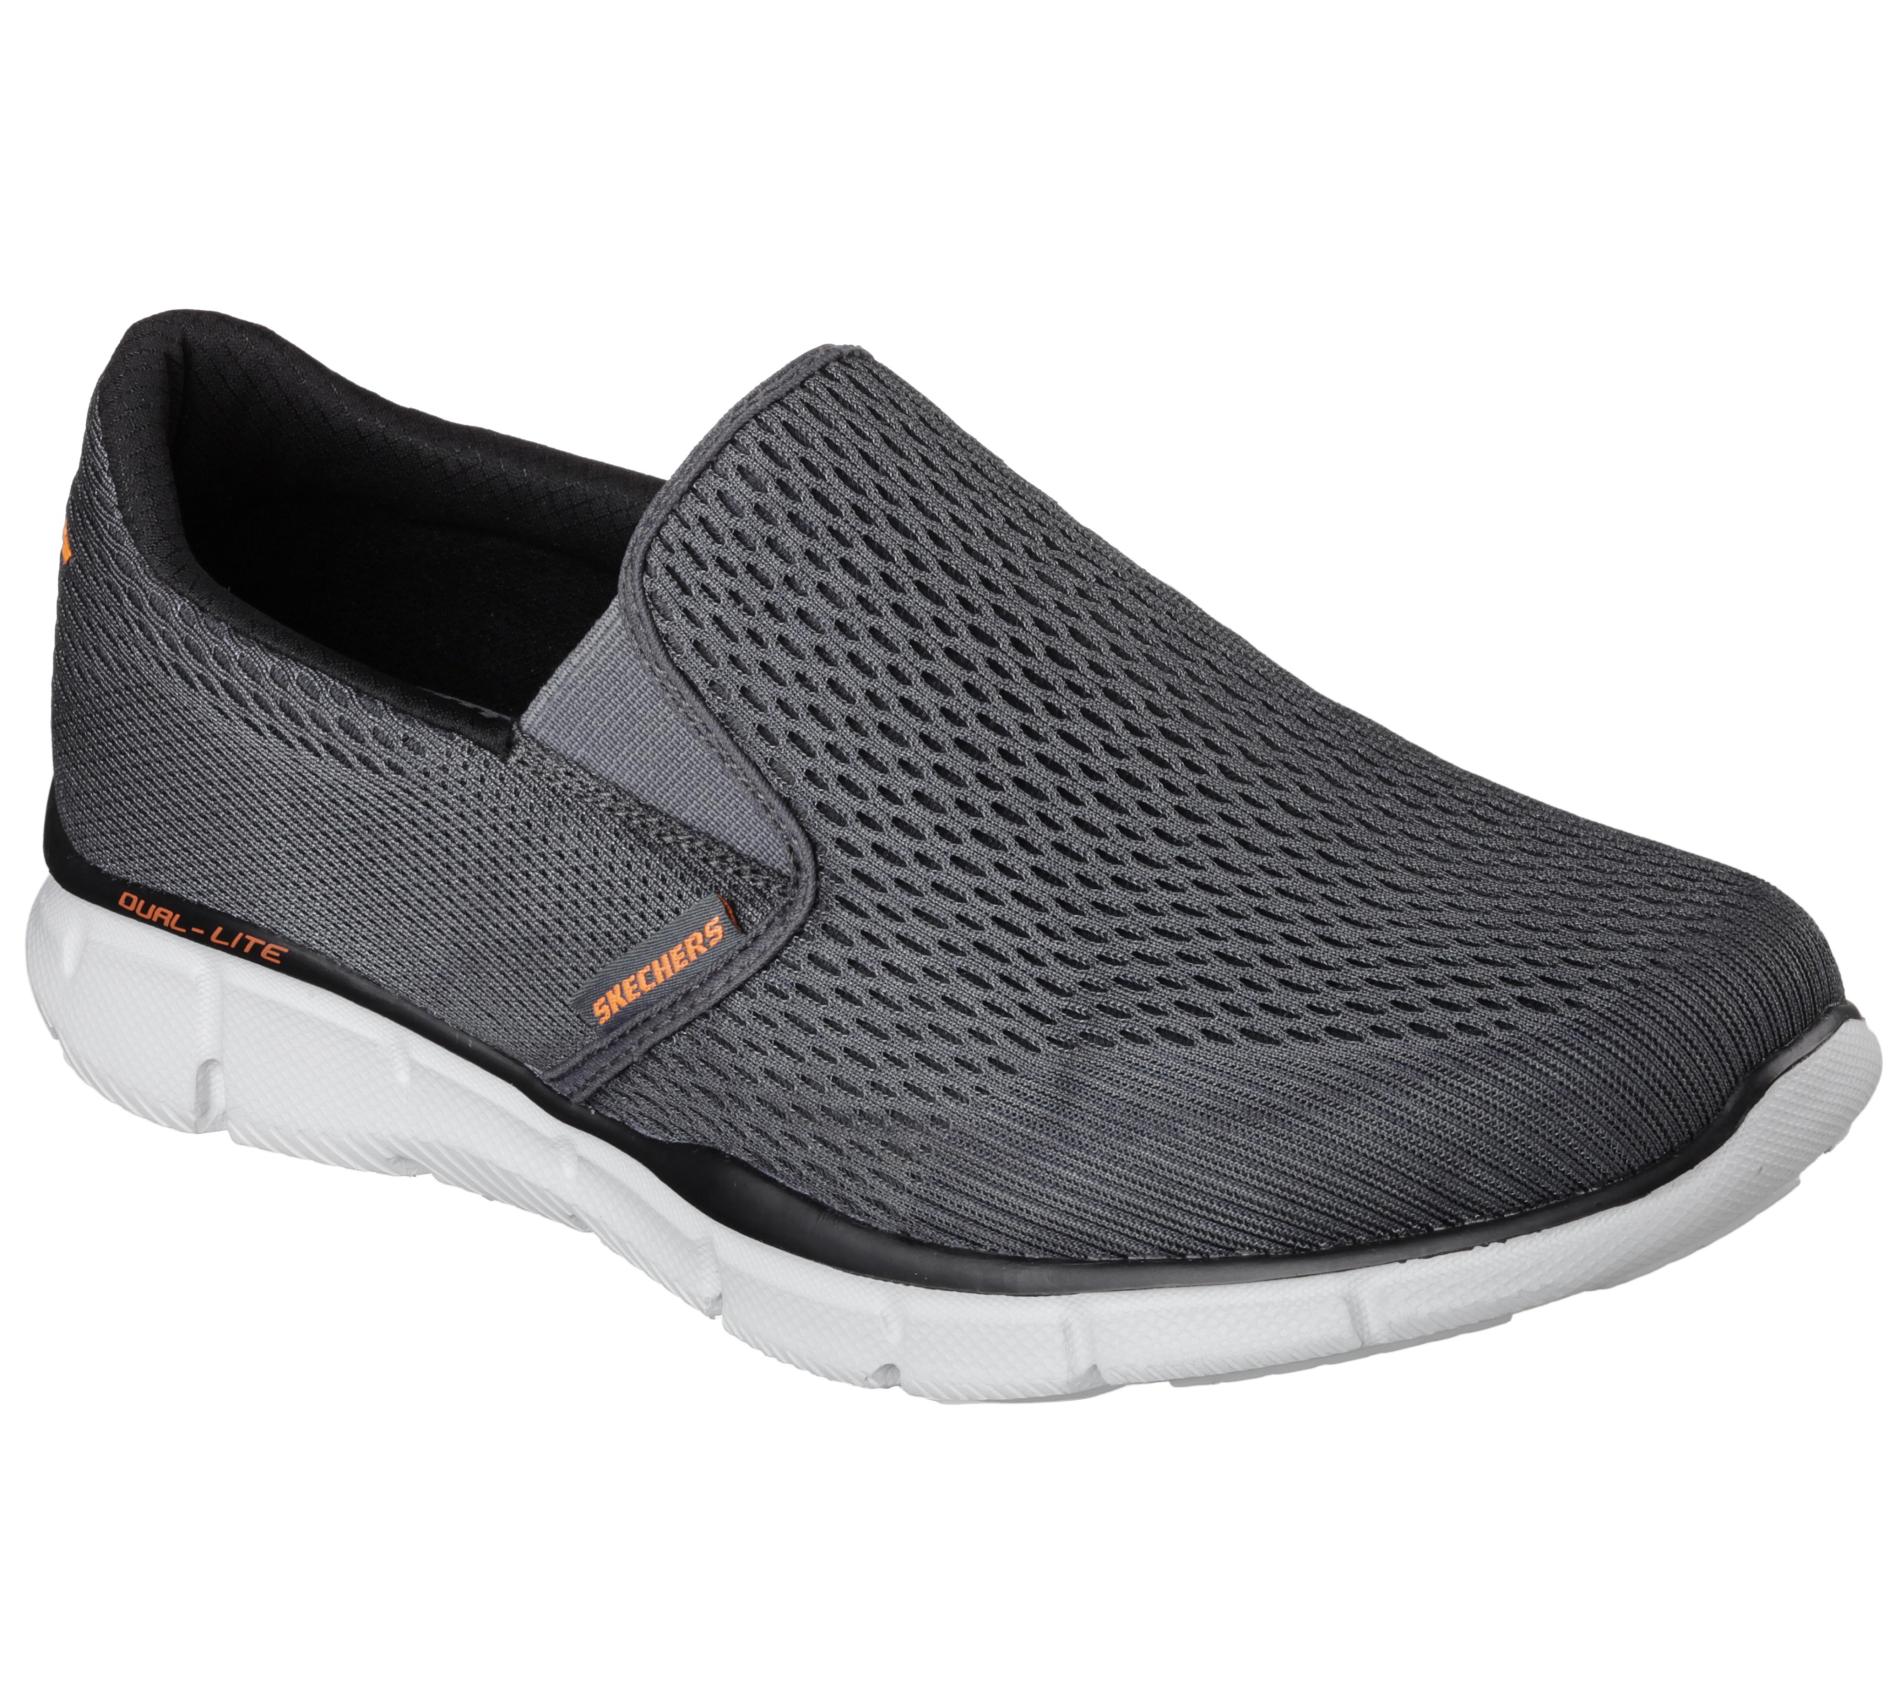 Skechers Men's Equalizer Double Play Sneakers - Gray